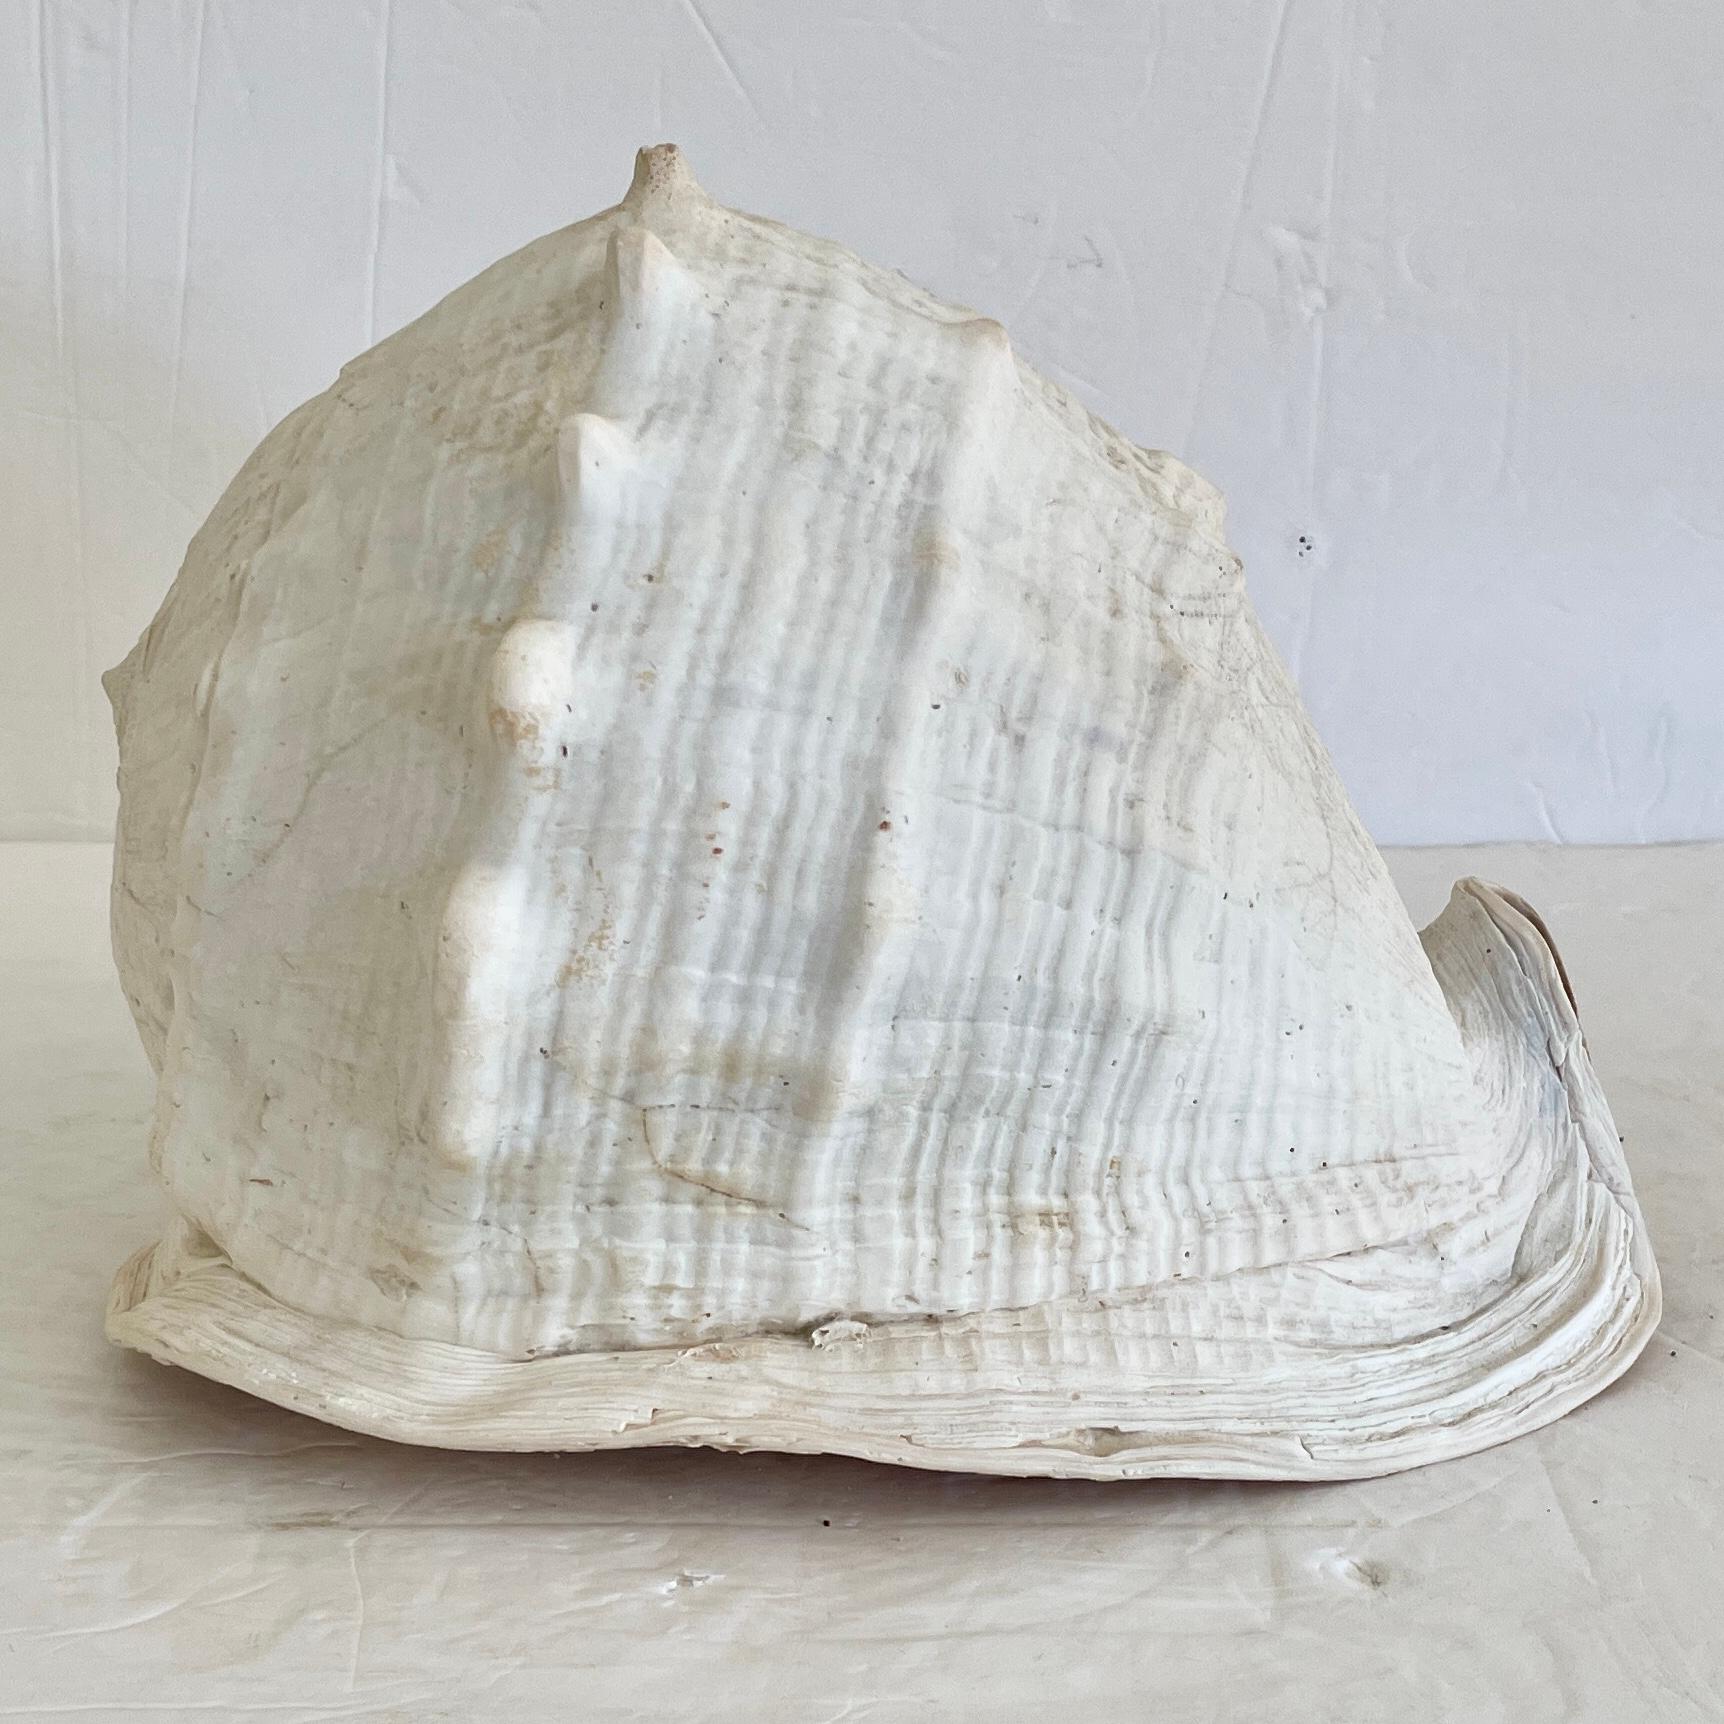 Fabulous round natural conch shell for tabletop decor. Great addition to your boho chic inspired interiors and table tops.